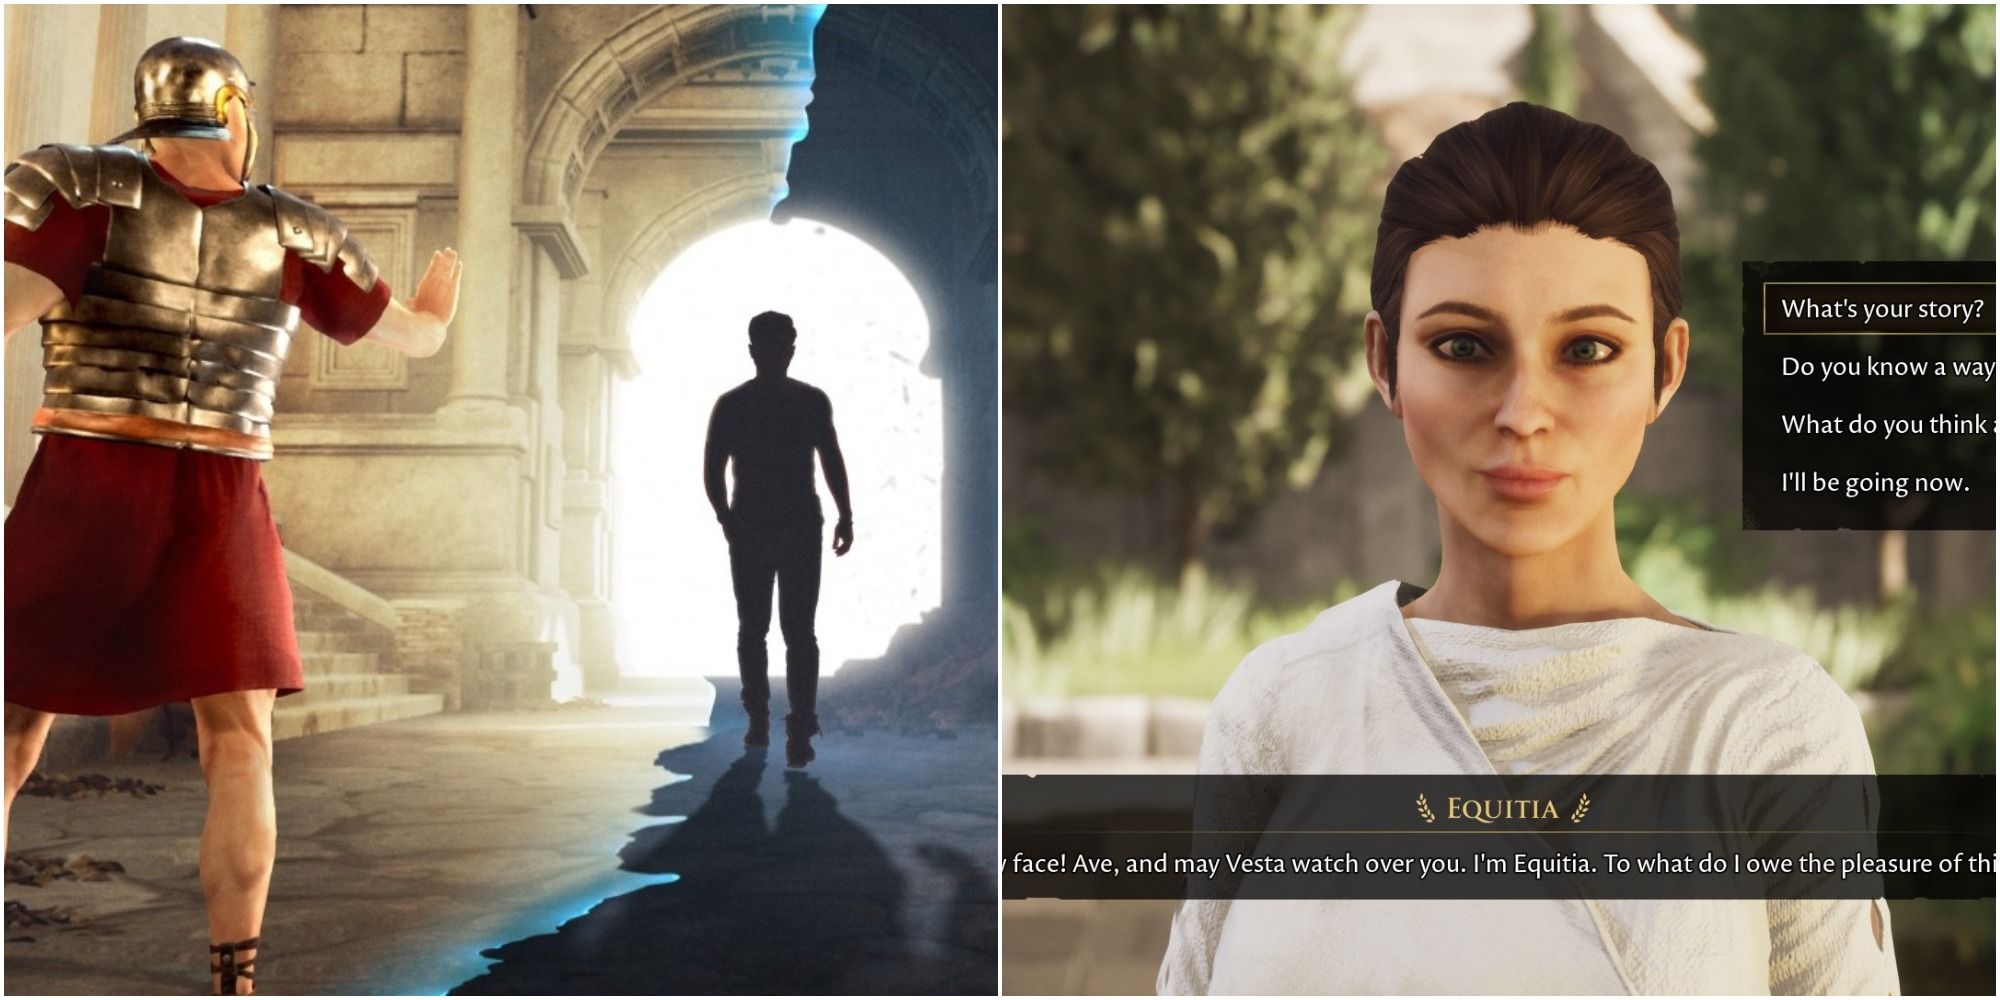 The Forgotten City Featured split image centurion with dialogue gameplay